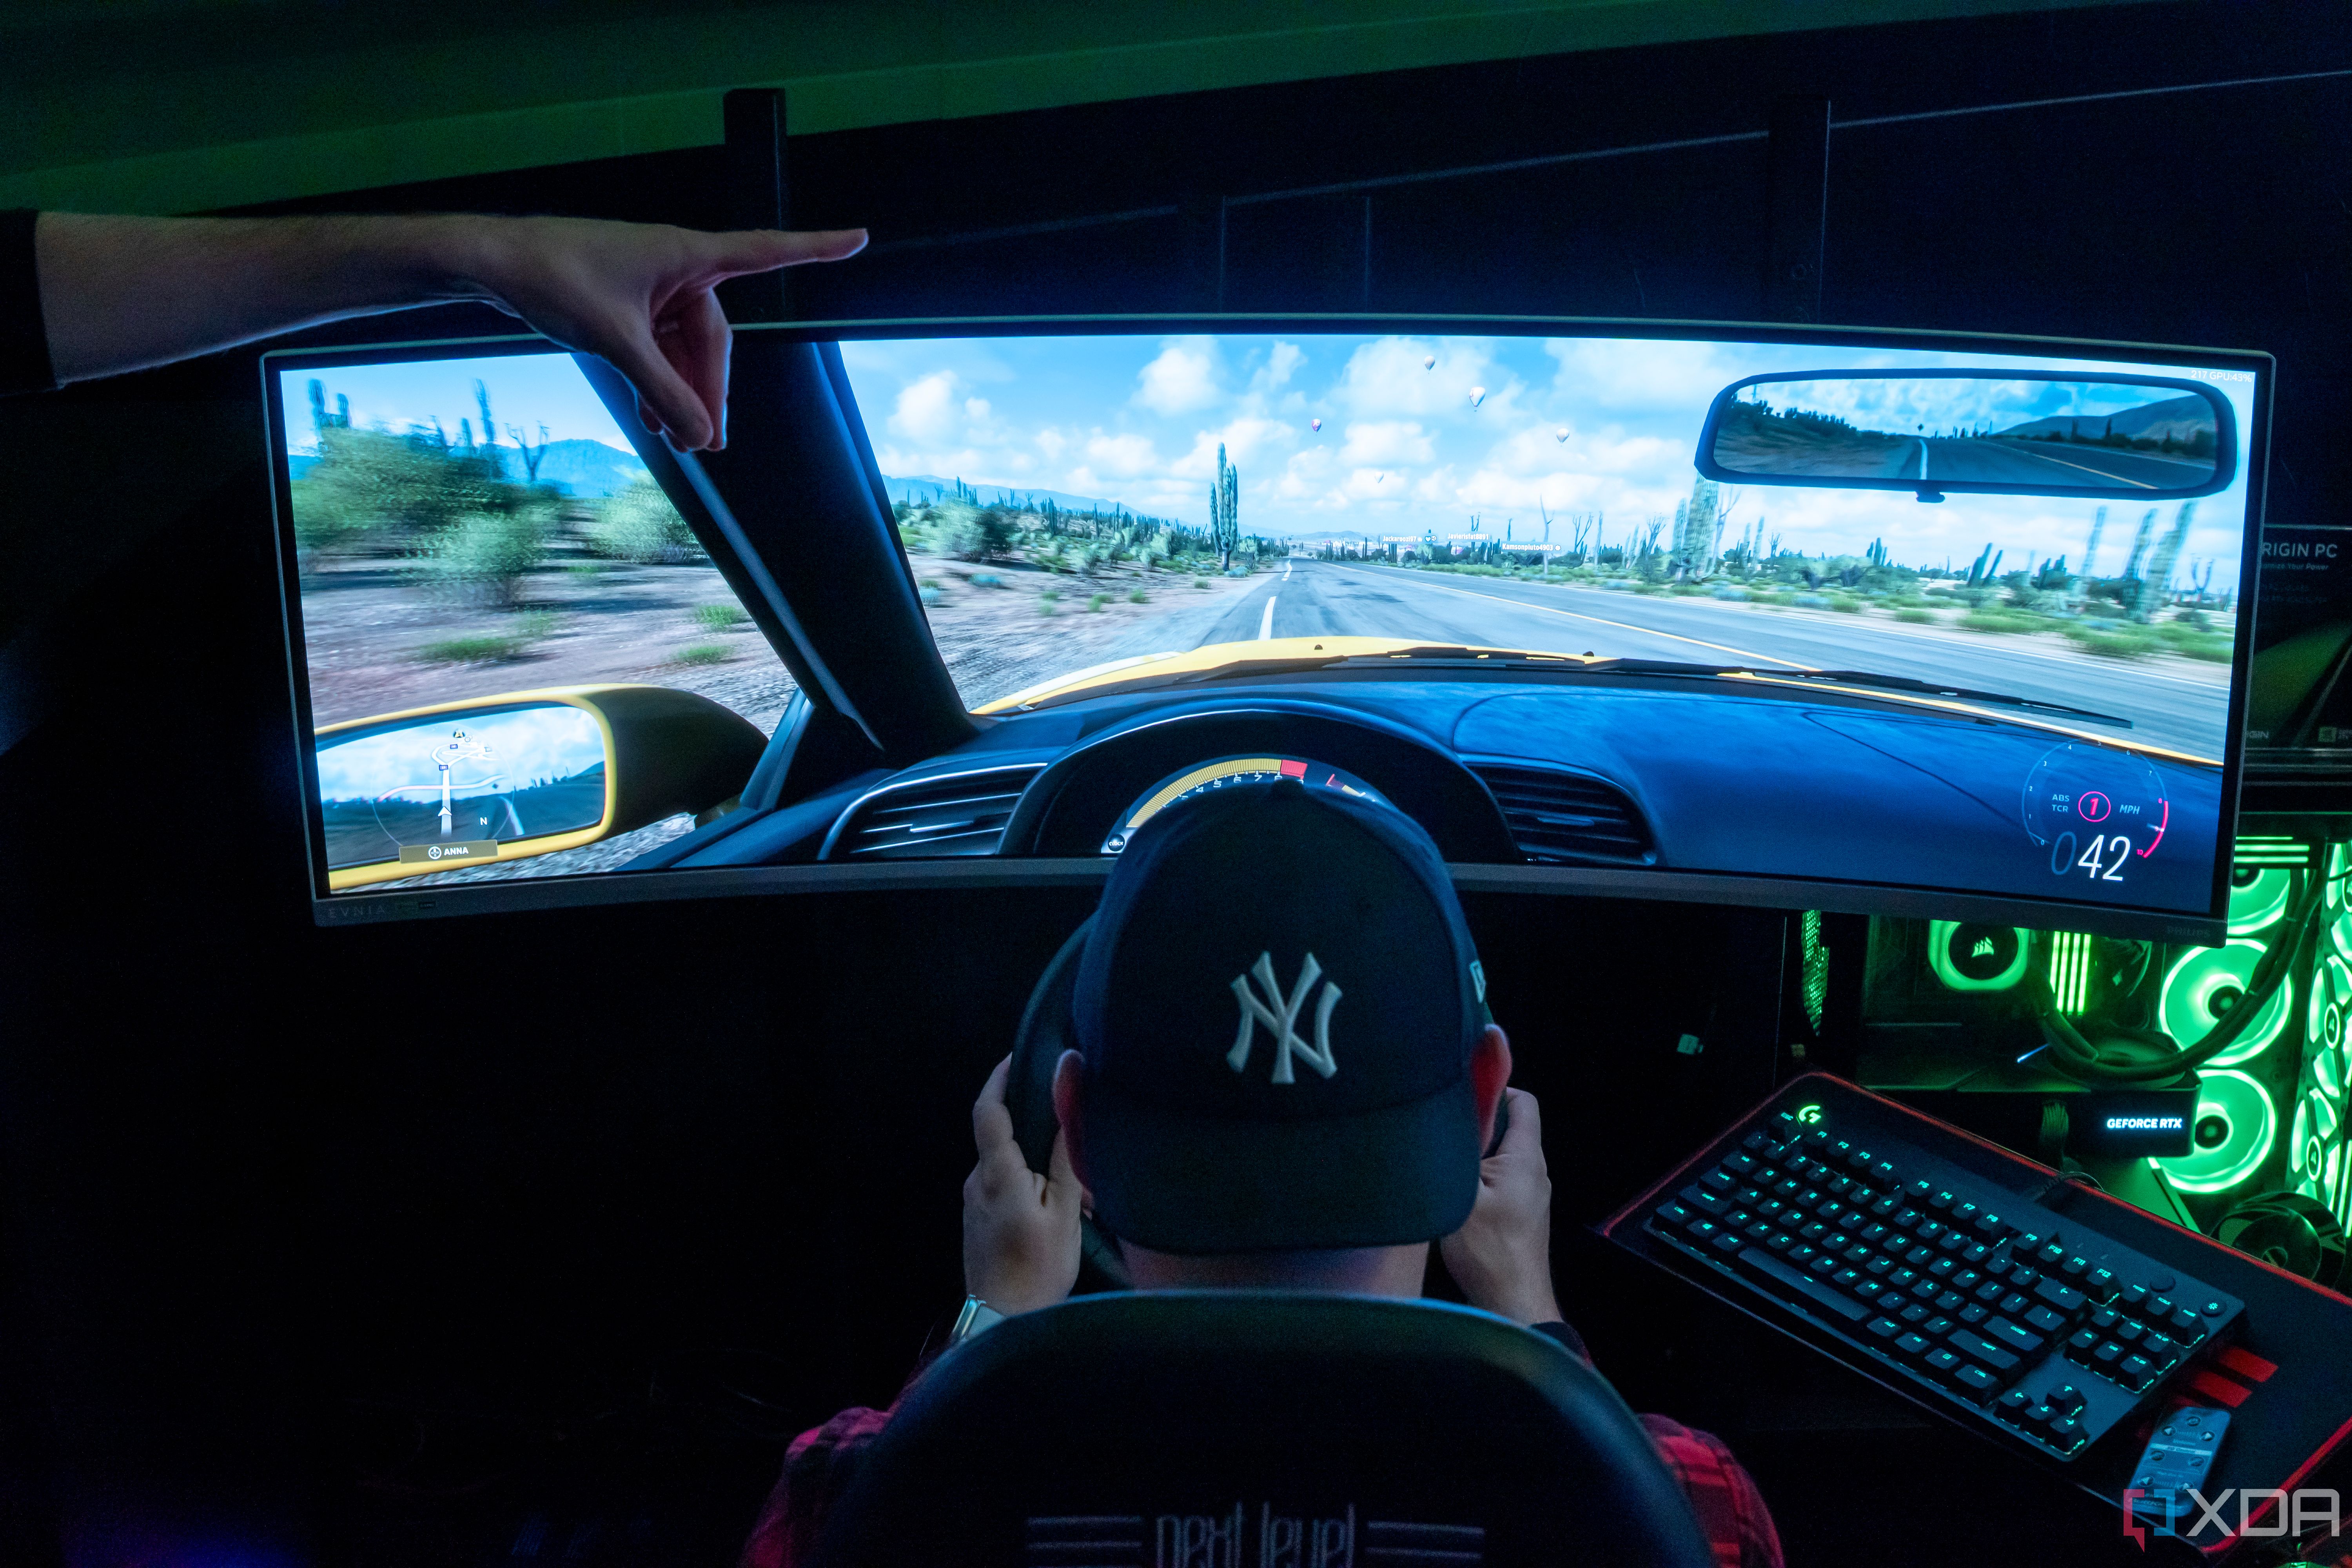 A man sitting in a gaming chair and using a steering wheel to play a videogame on a large monitor